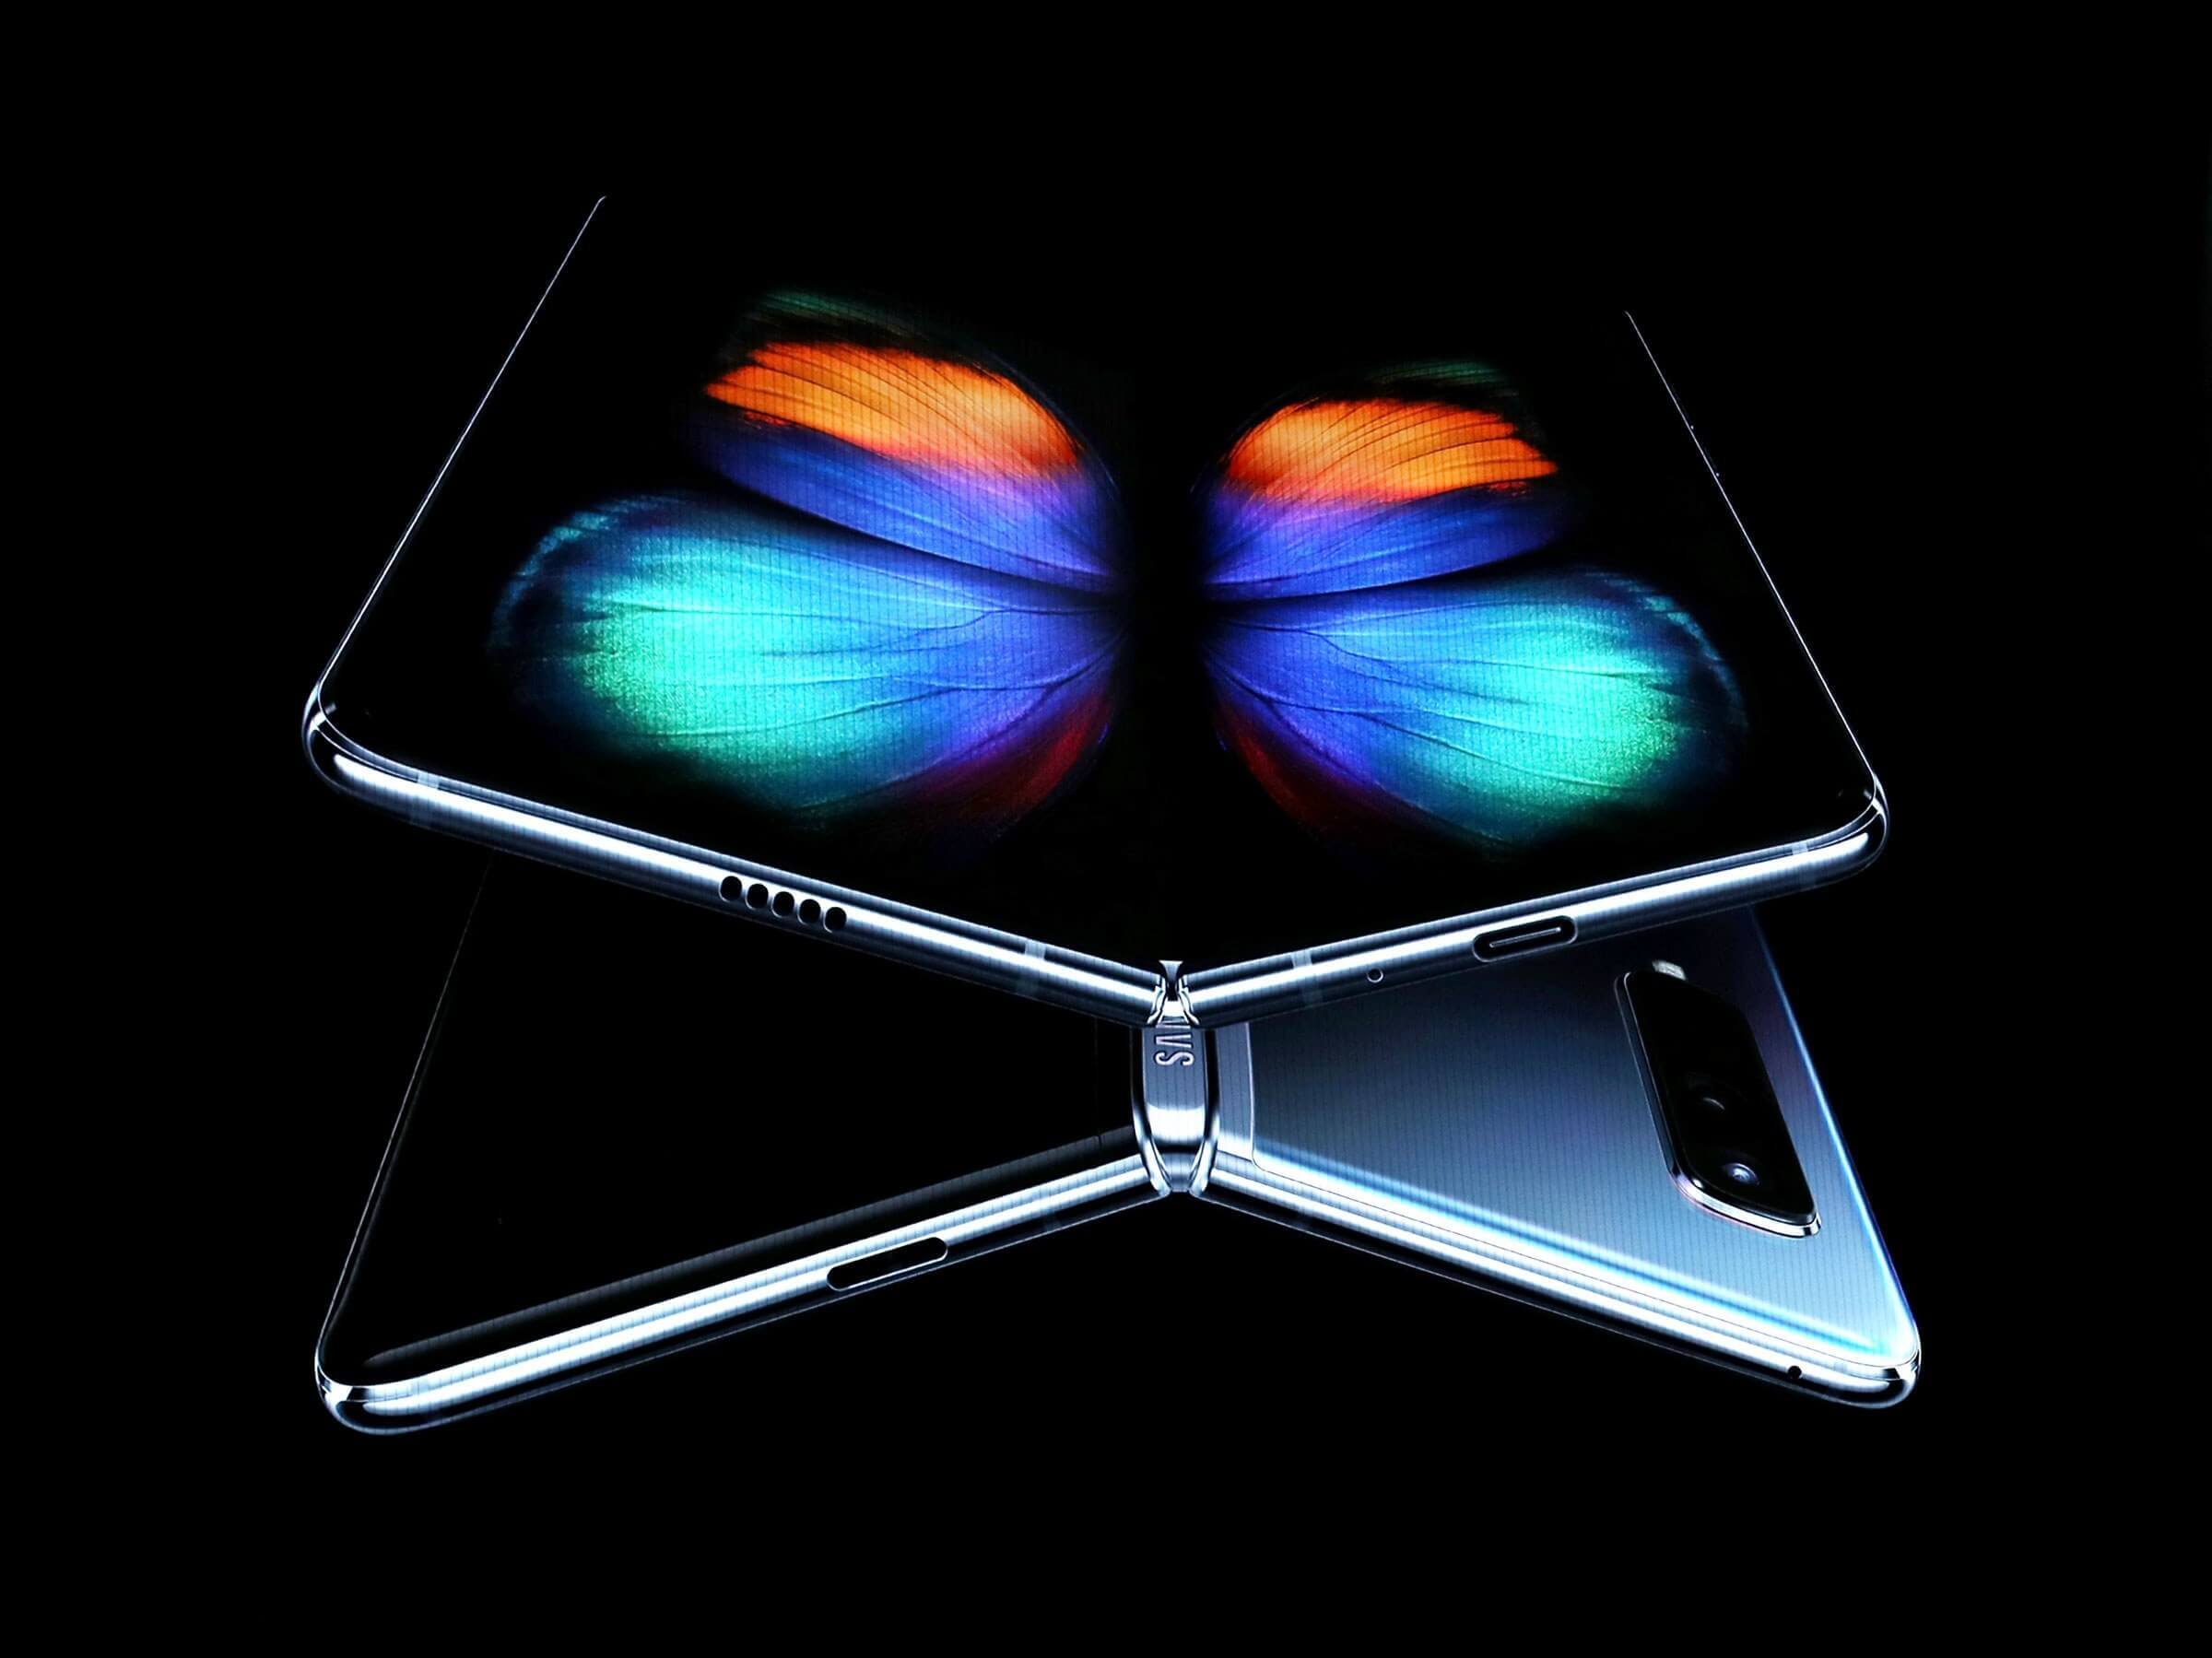 A cheaper, redesigned Galaxy Fold could arrive in April